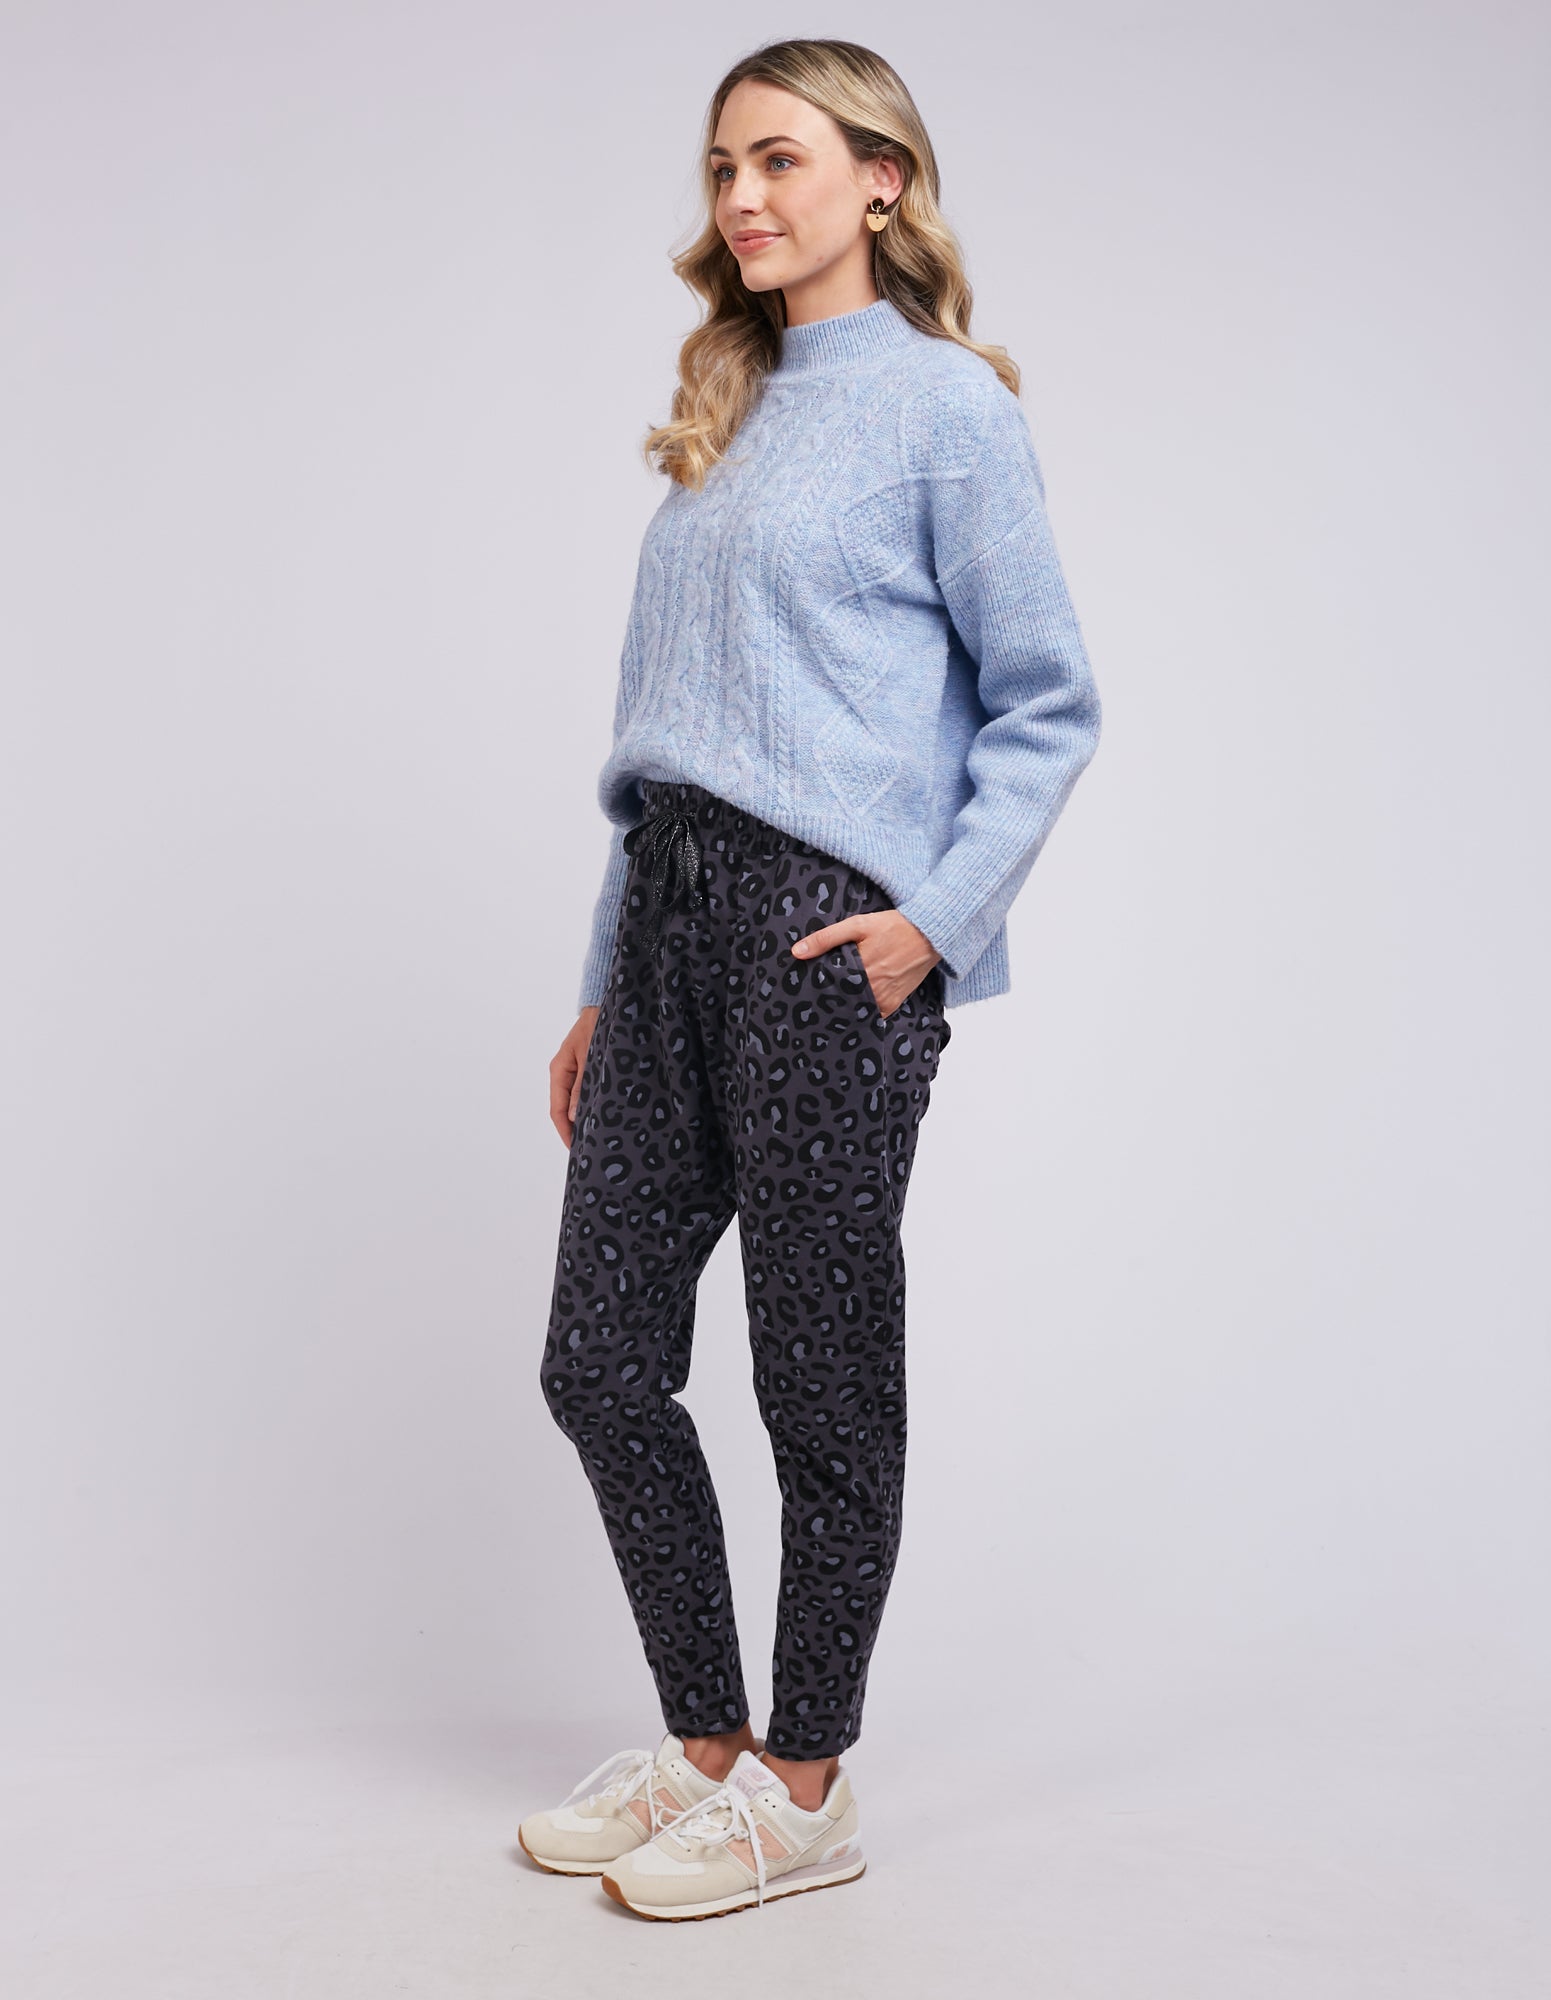 Fearless Lounge Pant Charcoal Leopard Print